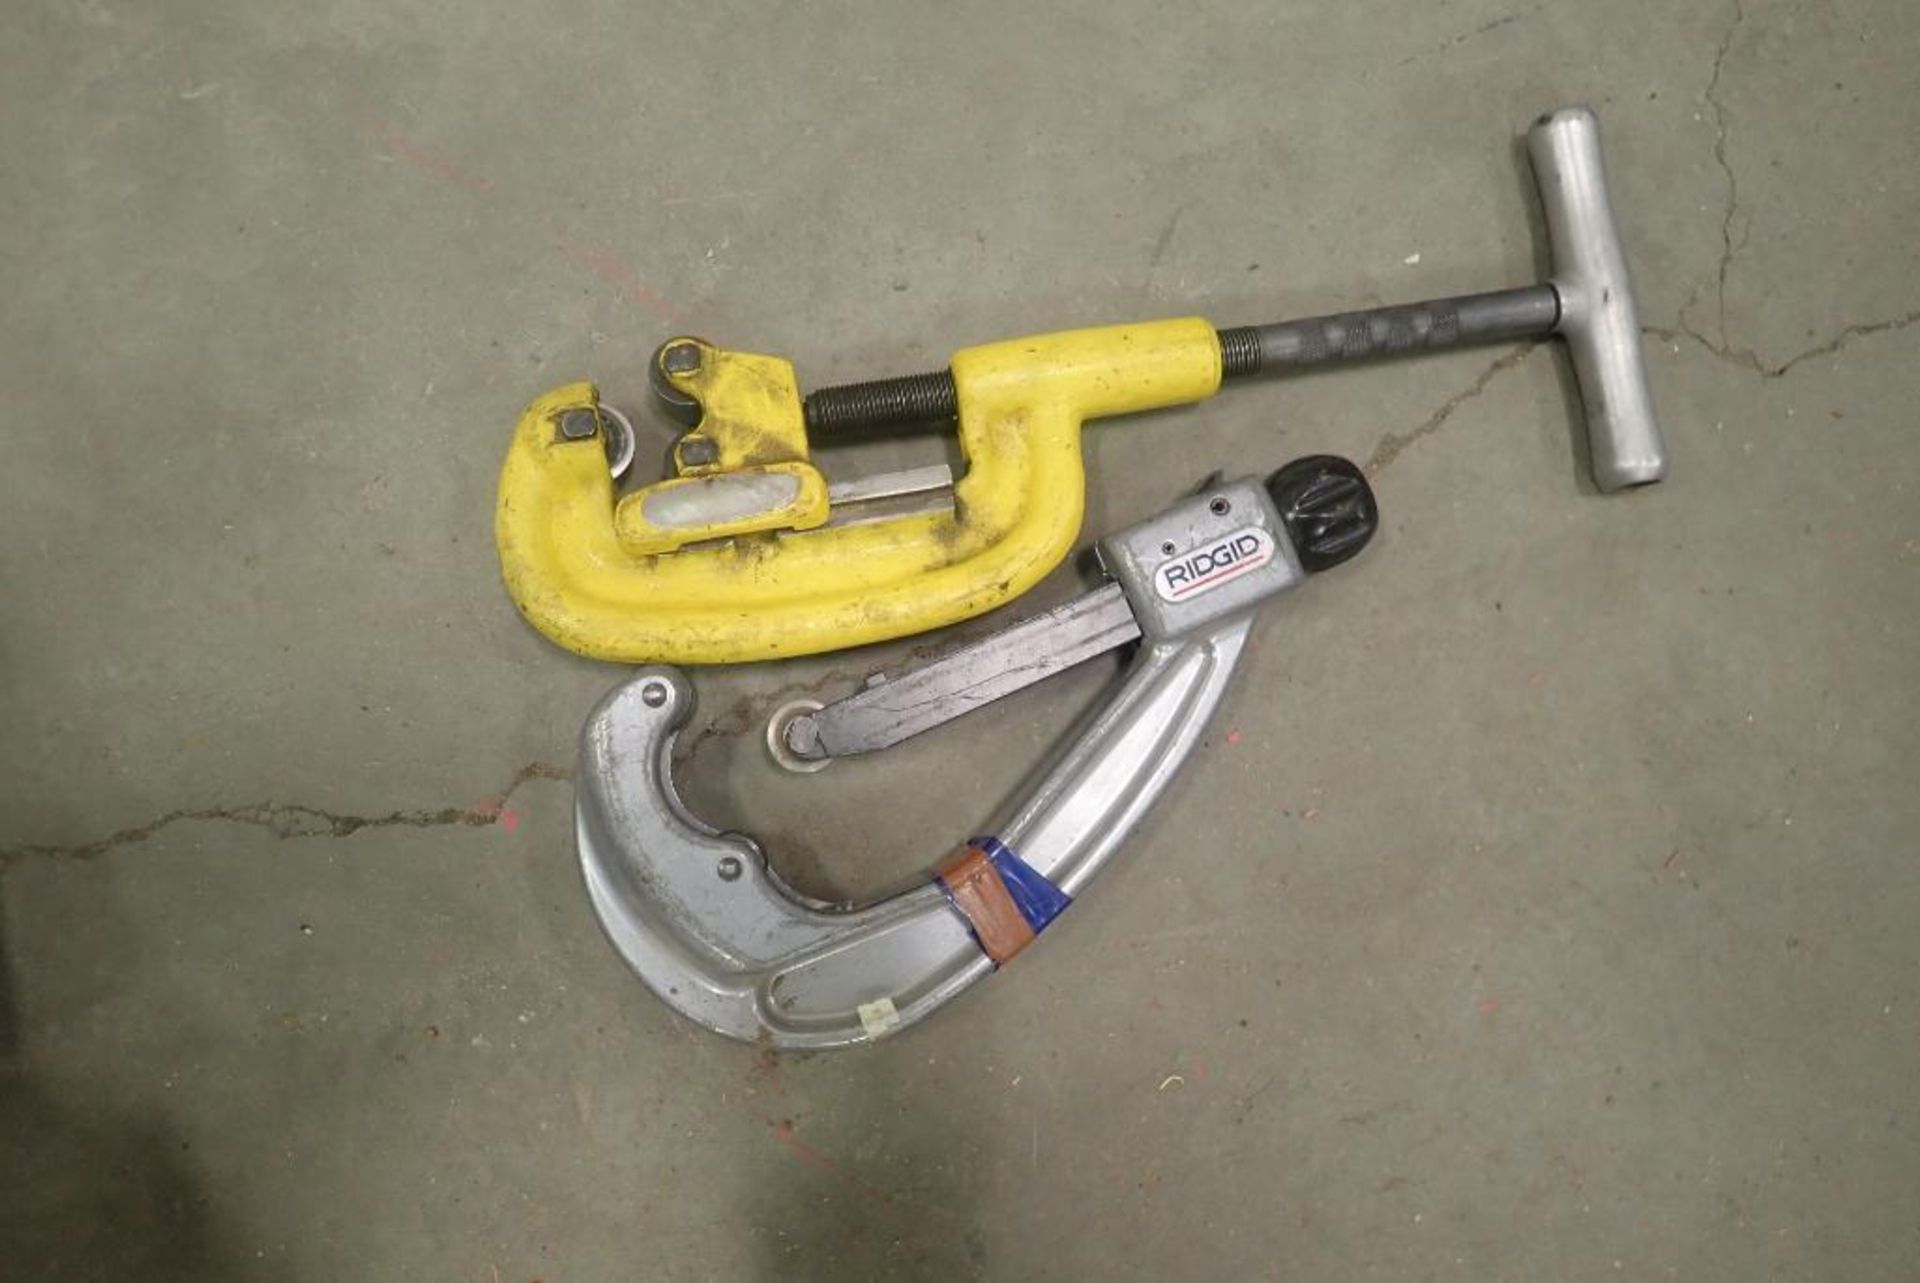 Lot of (2) Tubing Cutters.